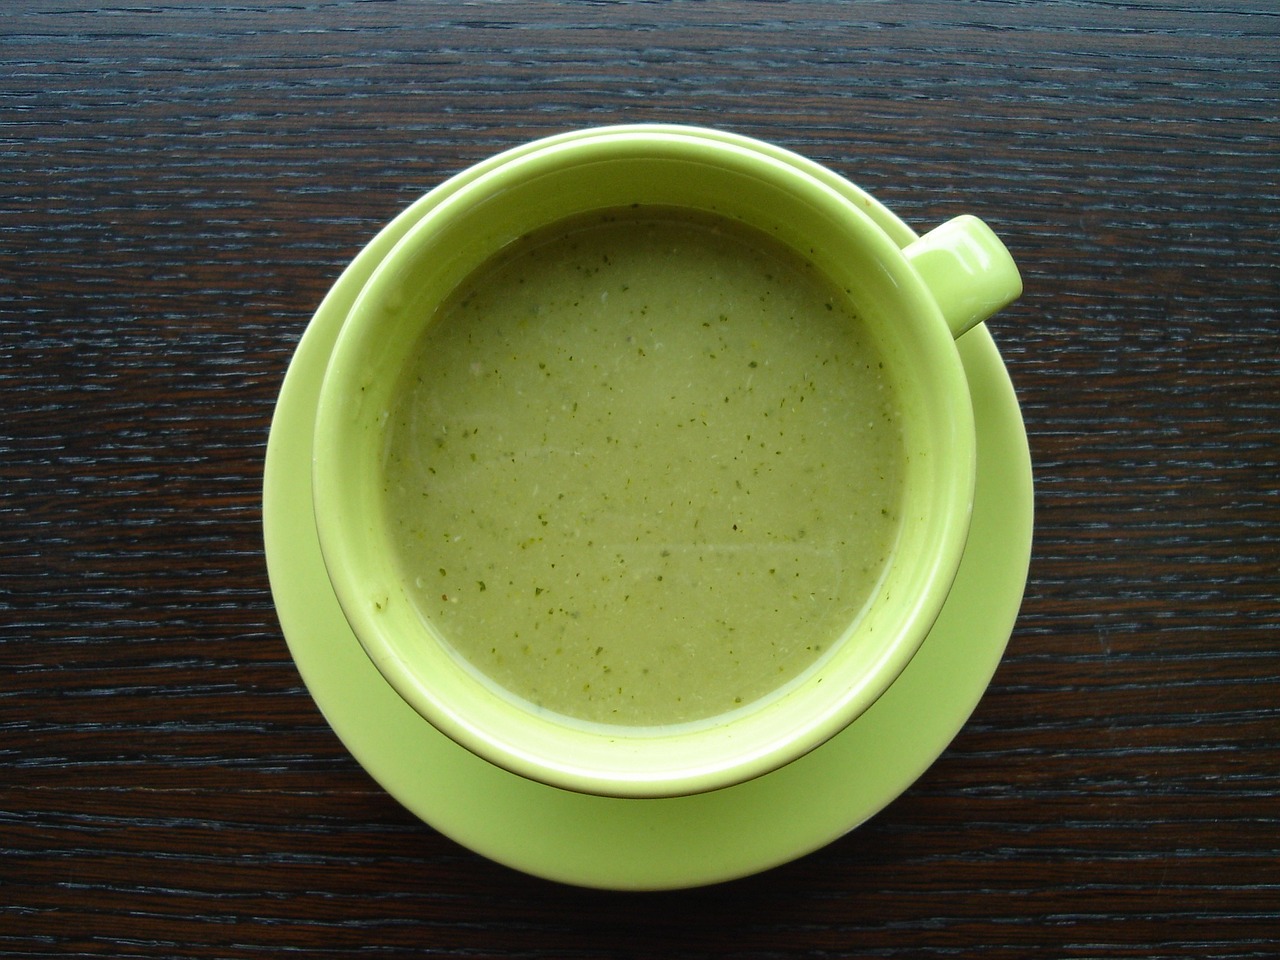 Chilled Minted Zucchini Soup